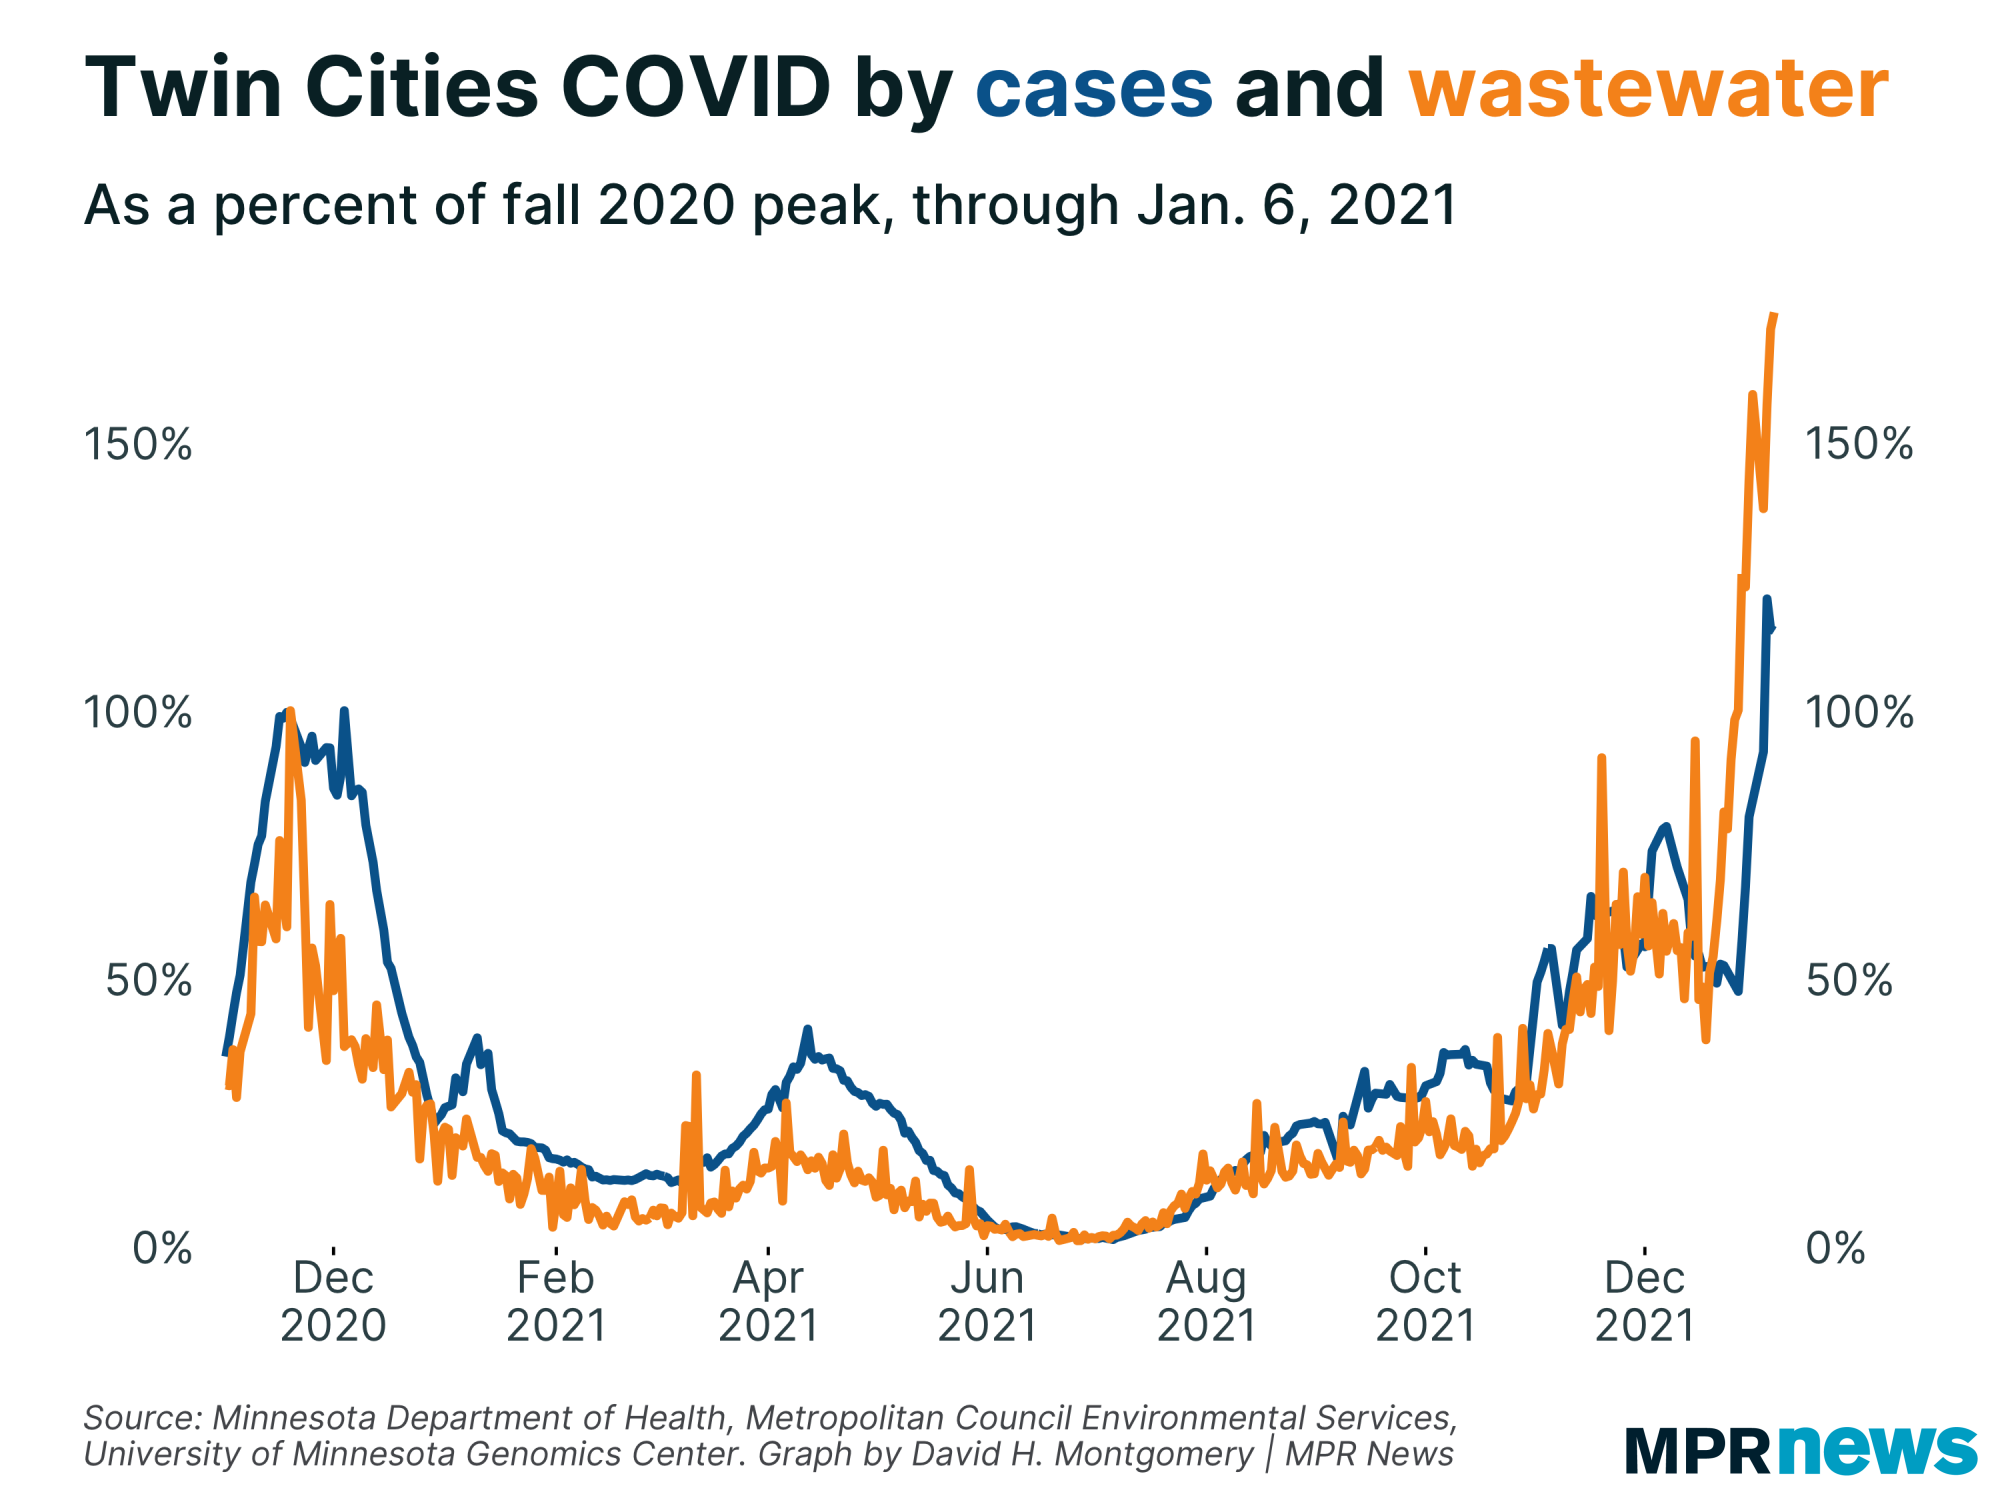 Graph of COVID-19 loads in Twin Cities wastewater vs. metro case counts